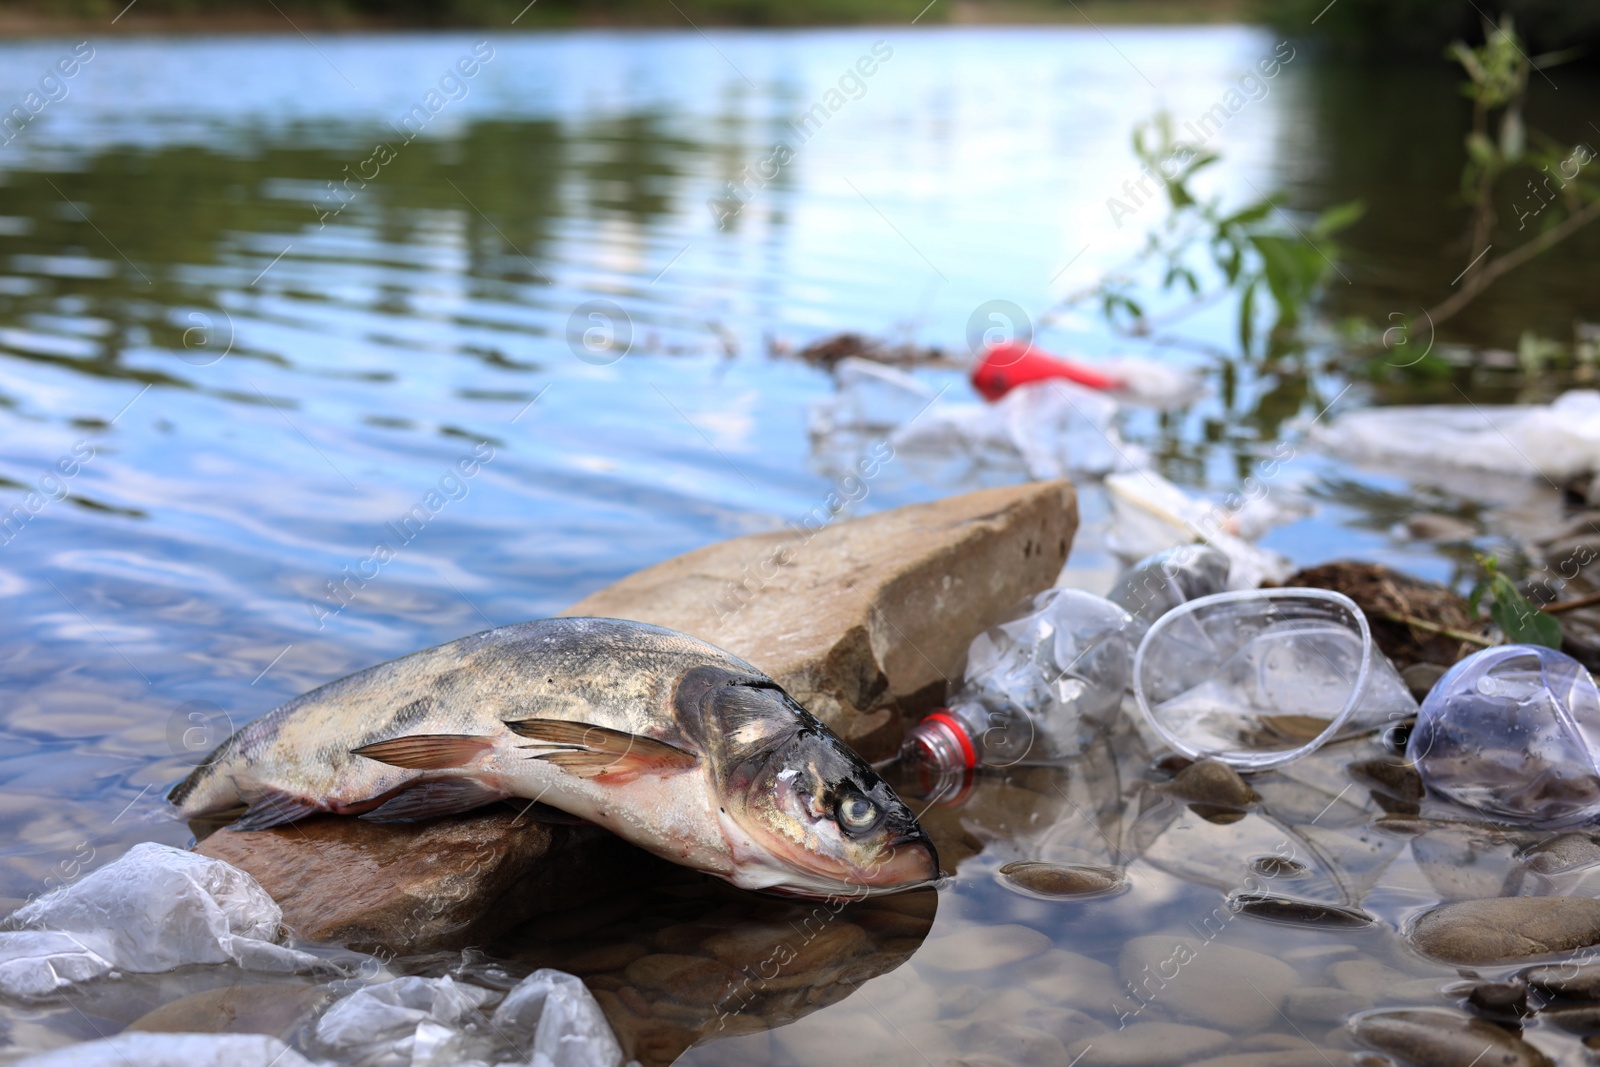 Photo of Dead fish on stone among trash in river. Environmental pollution concept